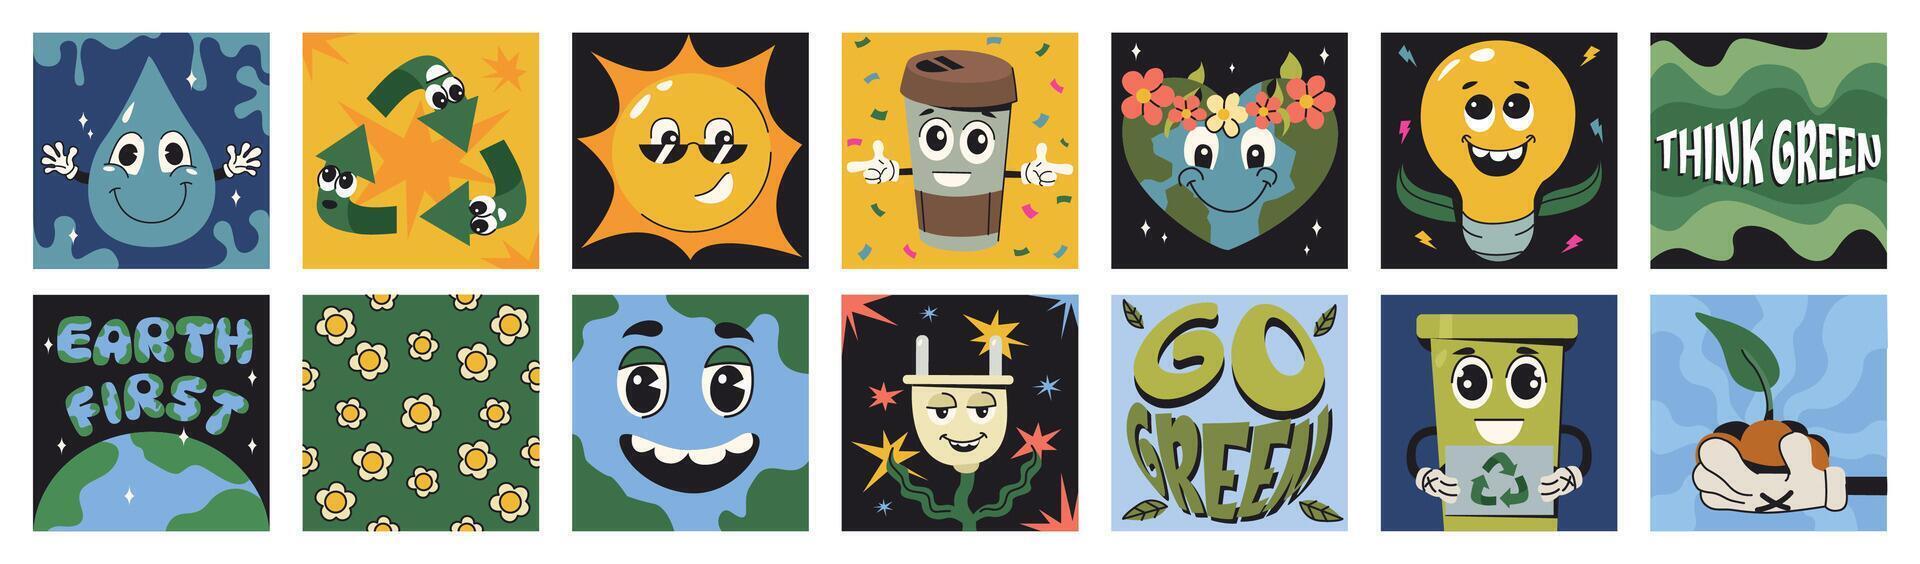 Square posters with funny cute characters of save the planet in trendy groovy style. Eco friendly stickers collection. World environment, ecology care, go green energy, zero waste or recycling concept vector